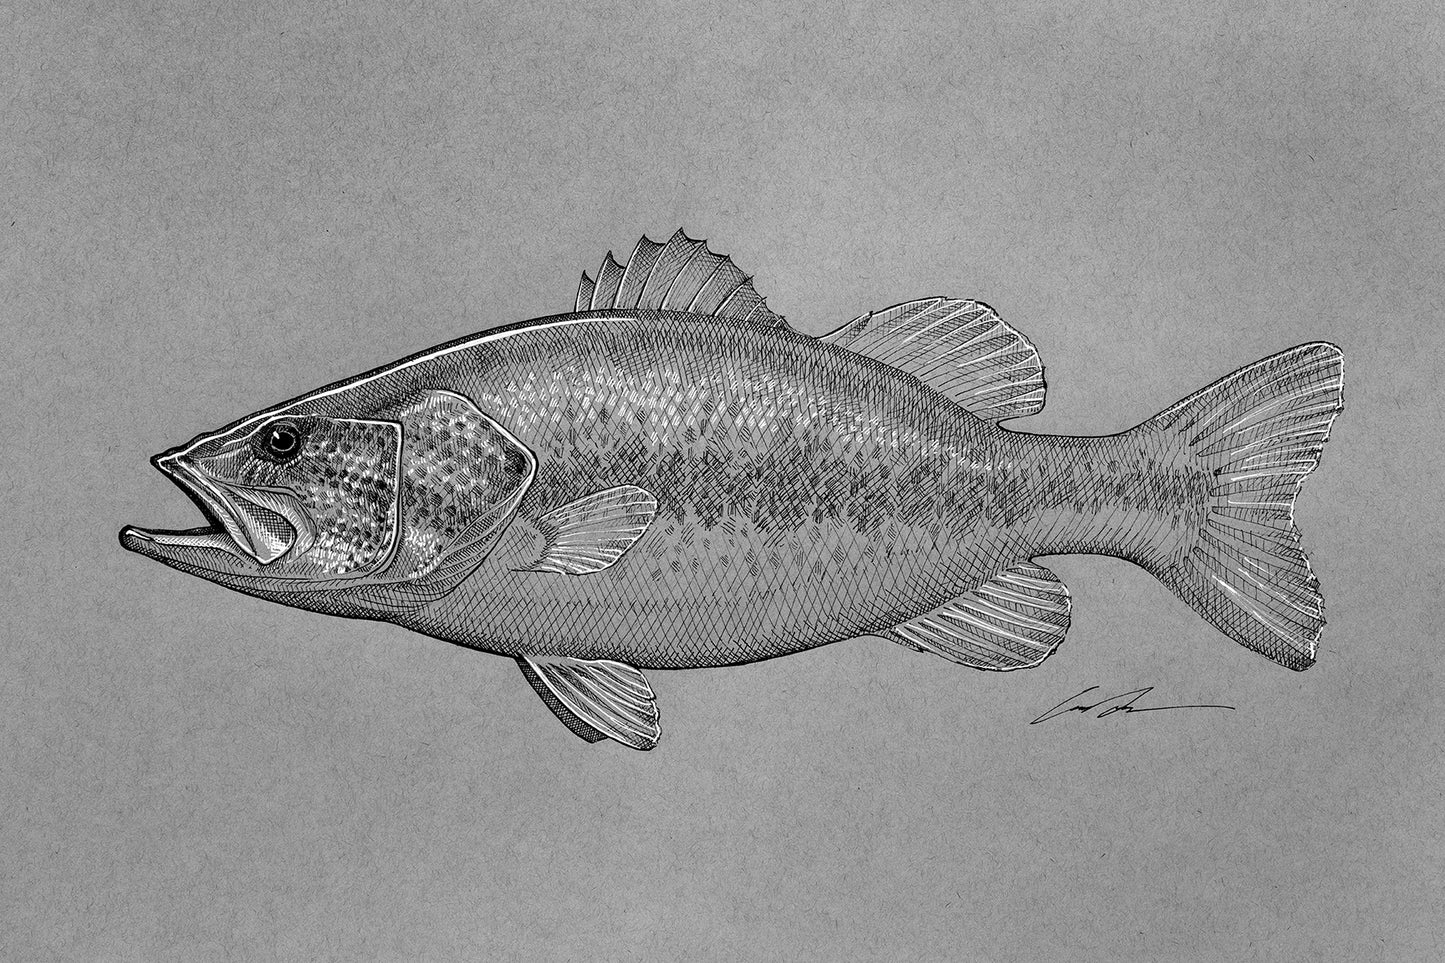 A pen and ink, black and white drawing of a largemouth bass.